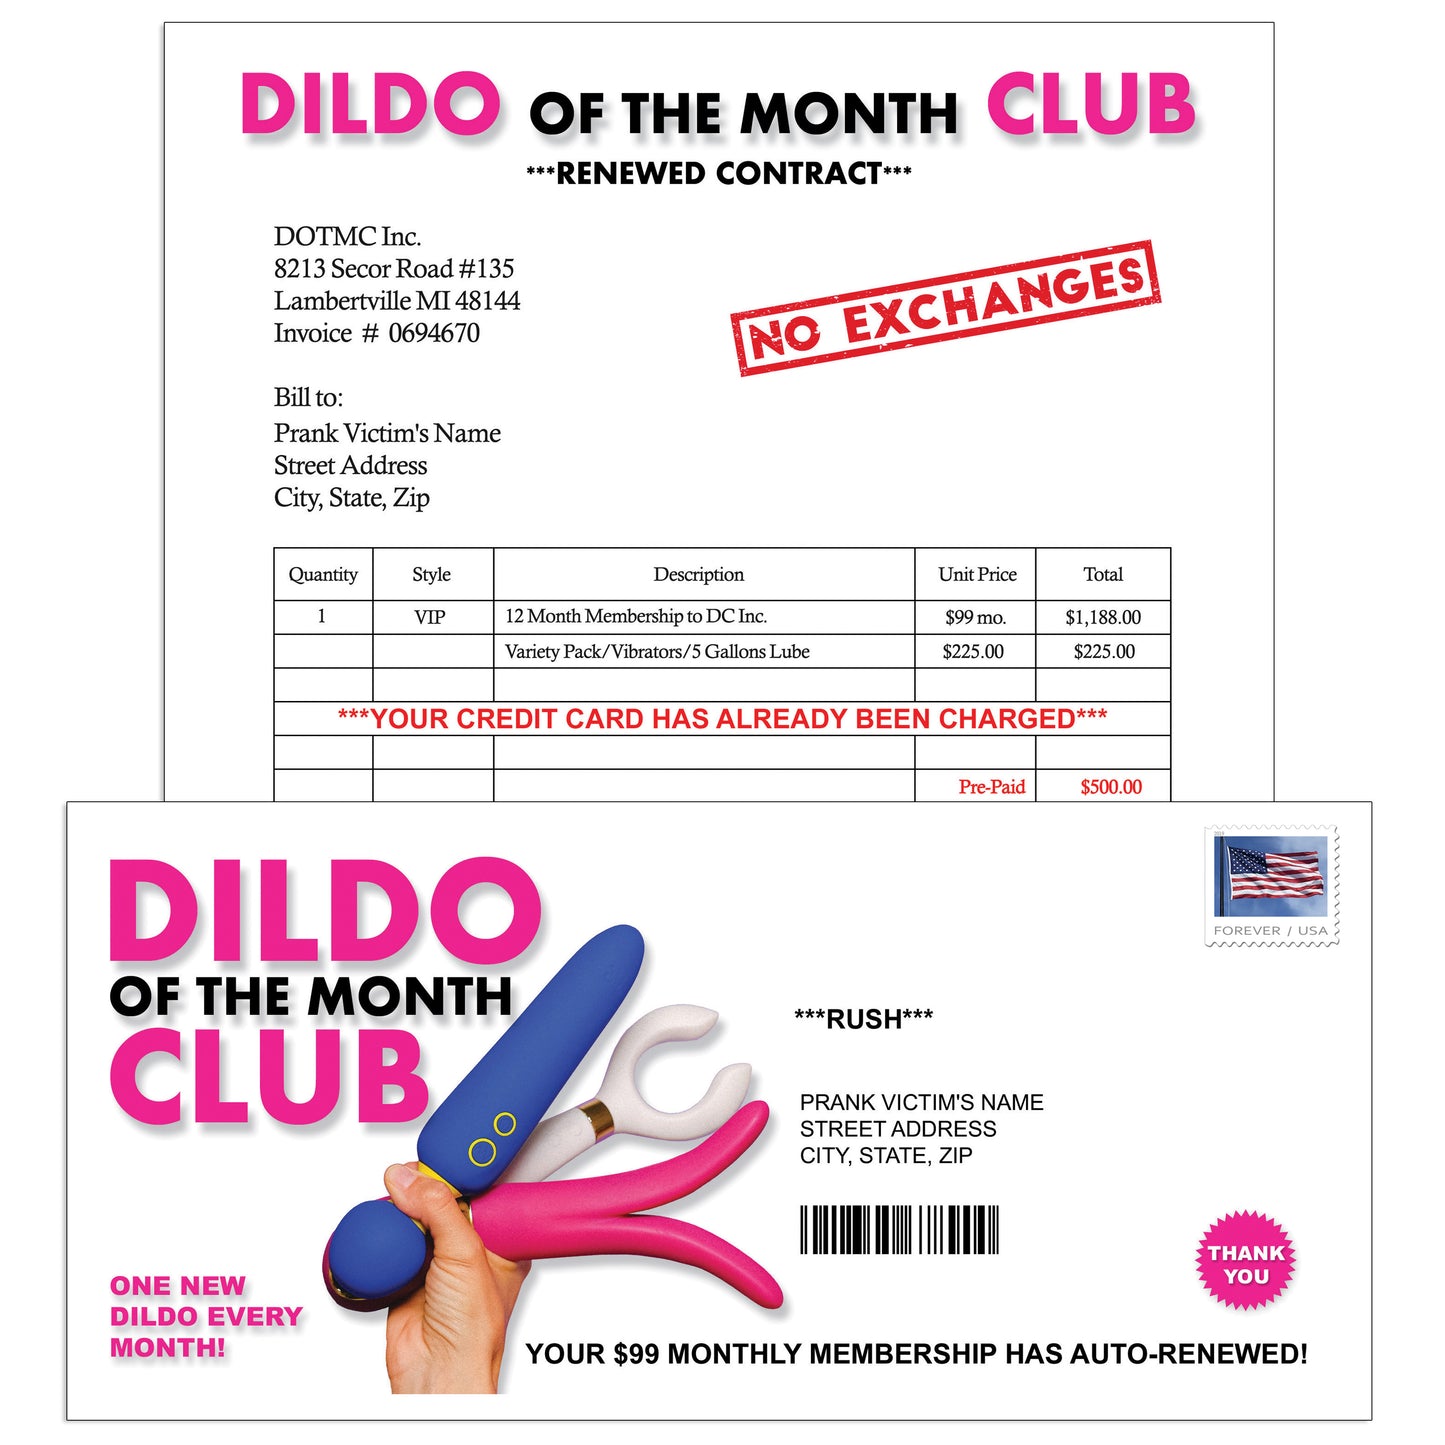 Dildo of the Month Mail Prank